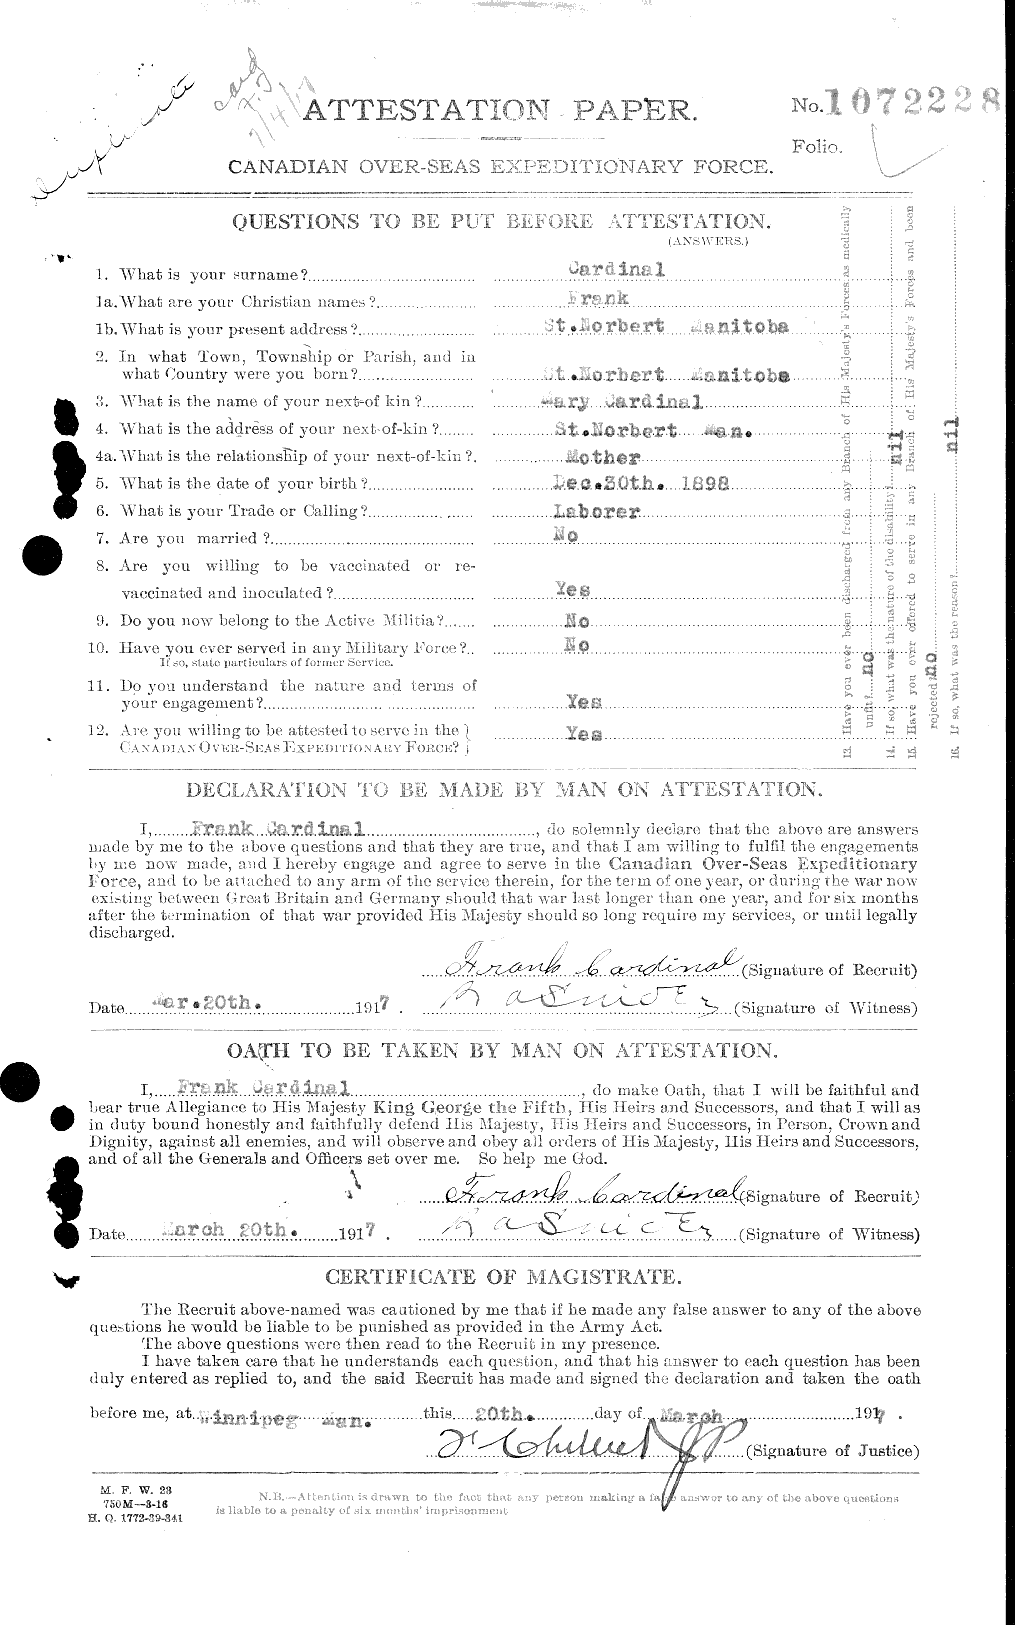 Personnel Records of the First World War - CEF 003196a